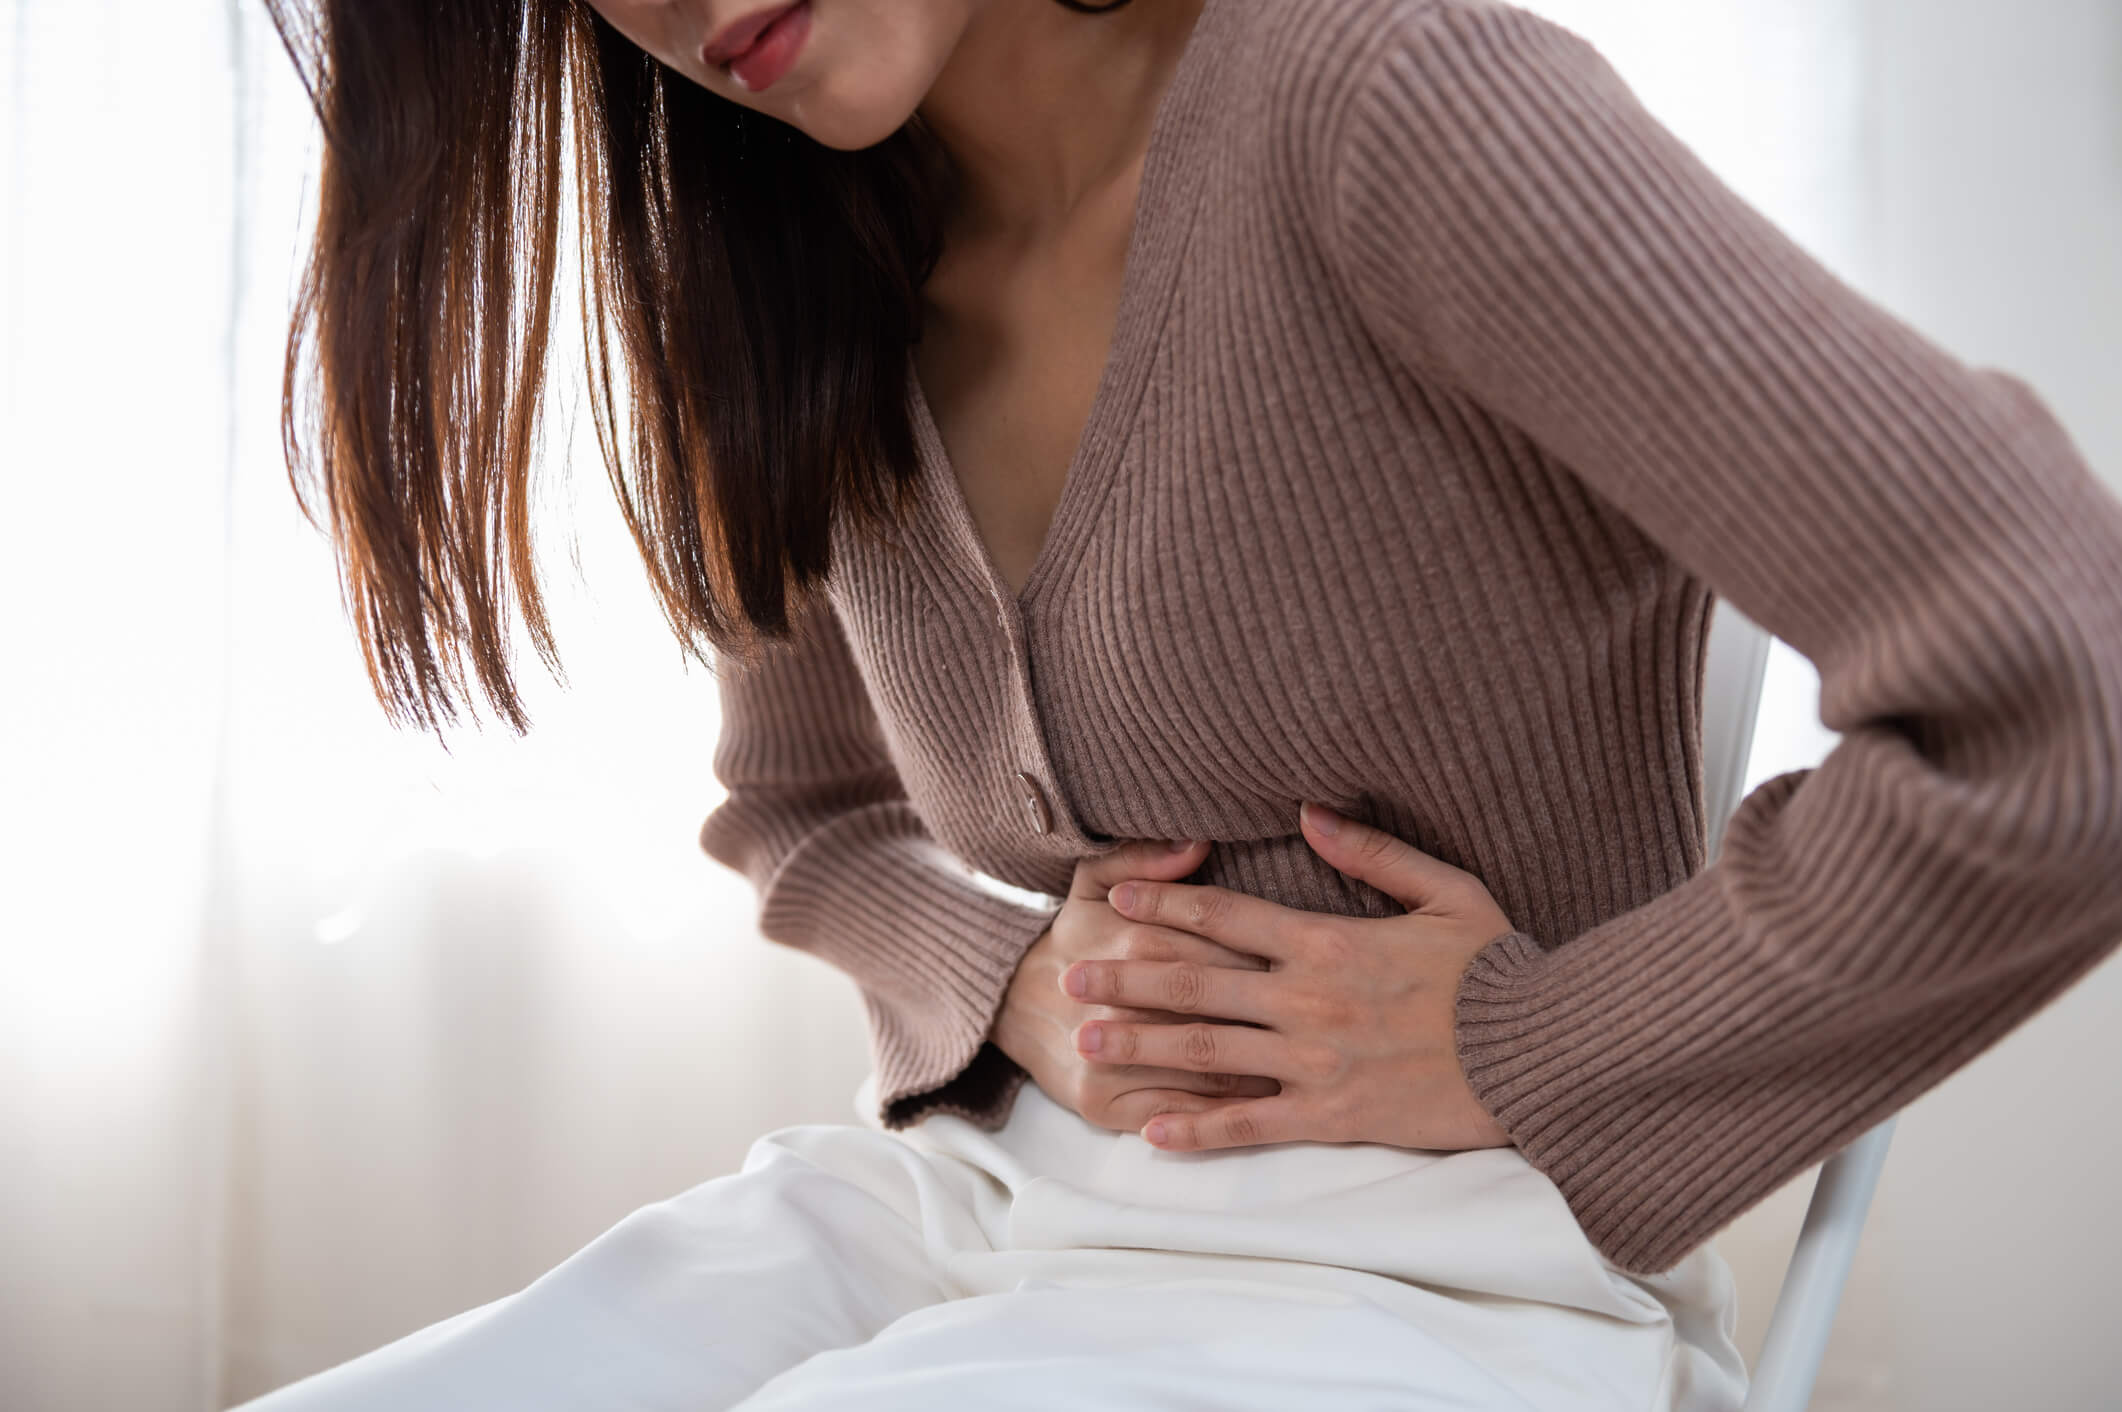 Woman with ovarian pains